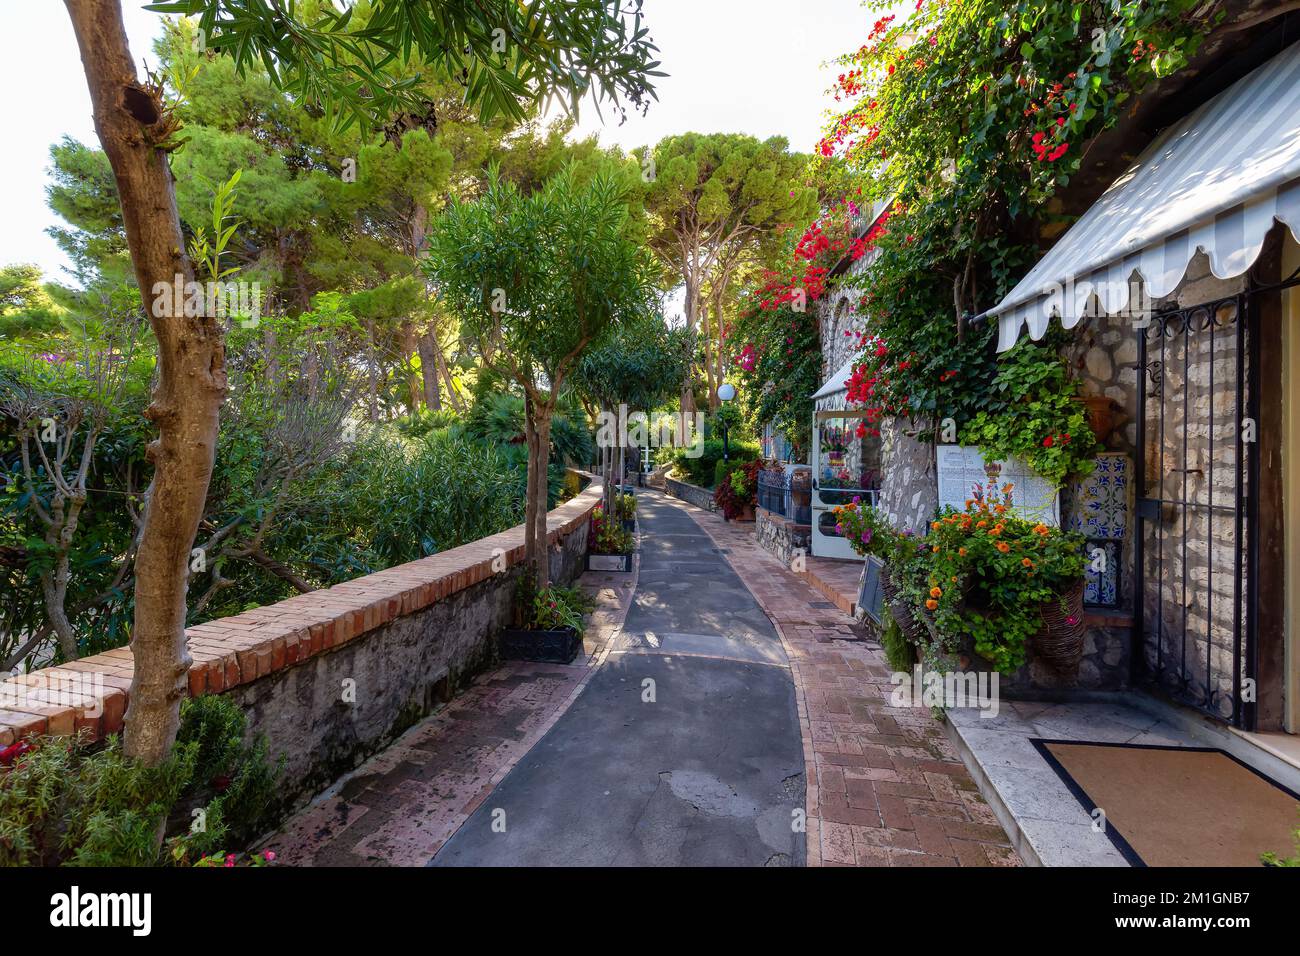 Path in a Garden with trees and flowers. Capri Island, Italy. Stock Photo